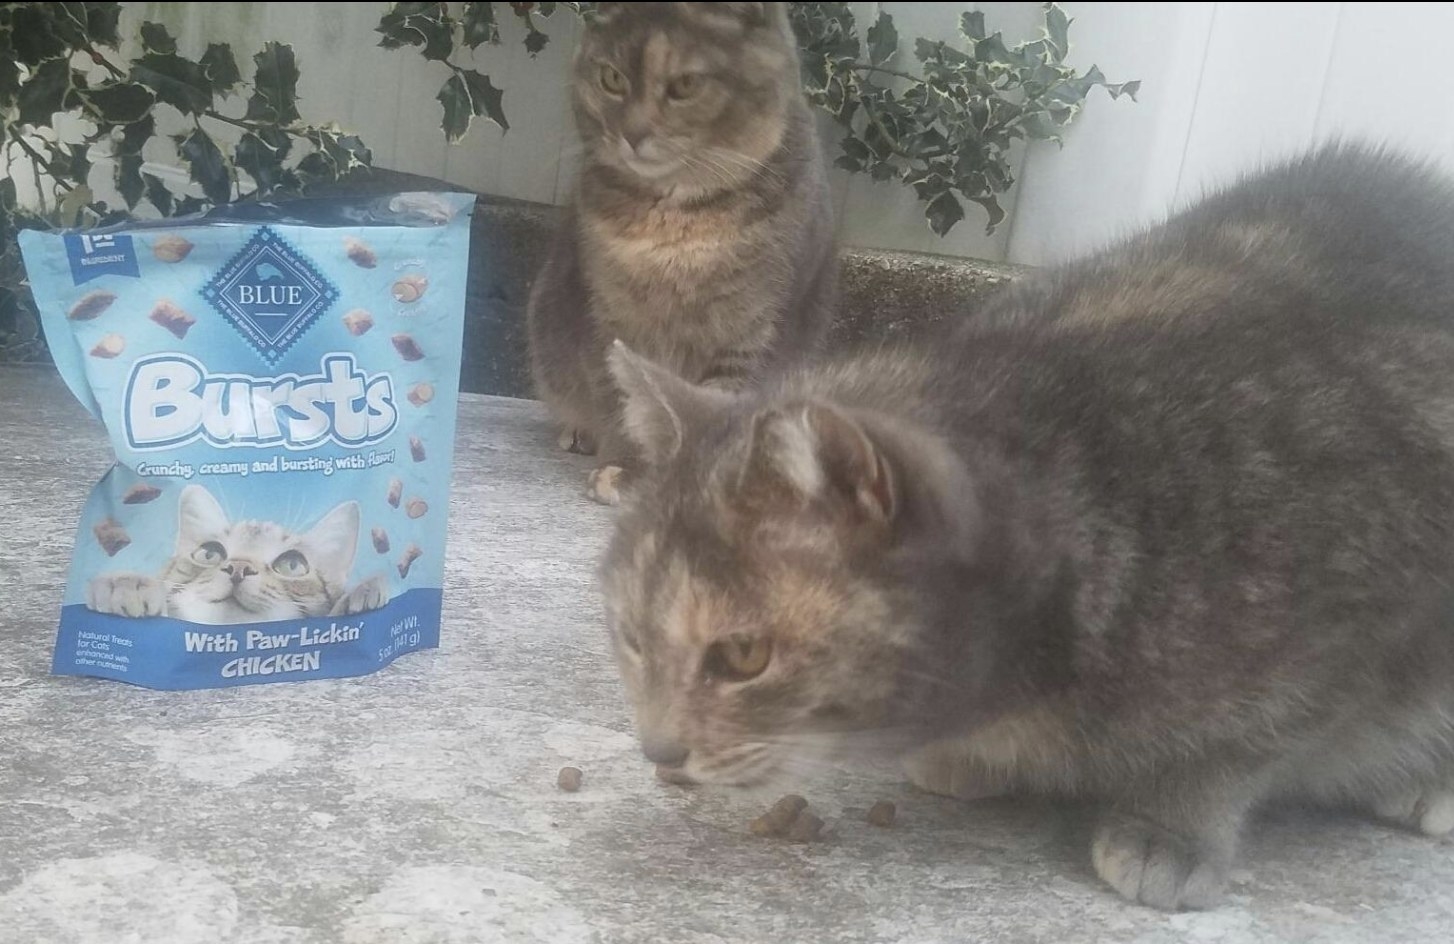 Two grey and brown cats sitting next to a pack of Blue Buffalo crunchy cat treats